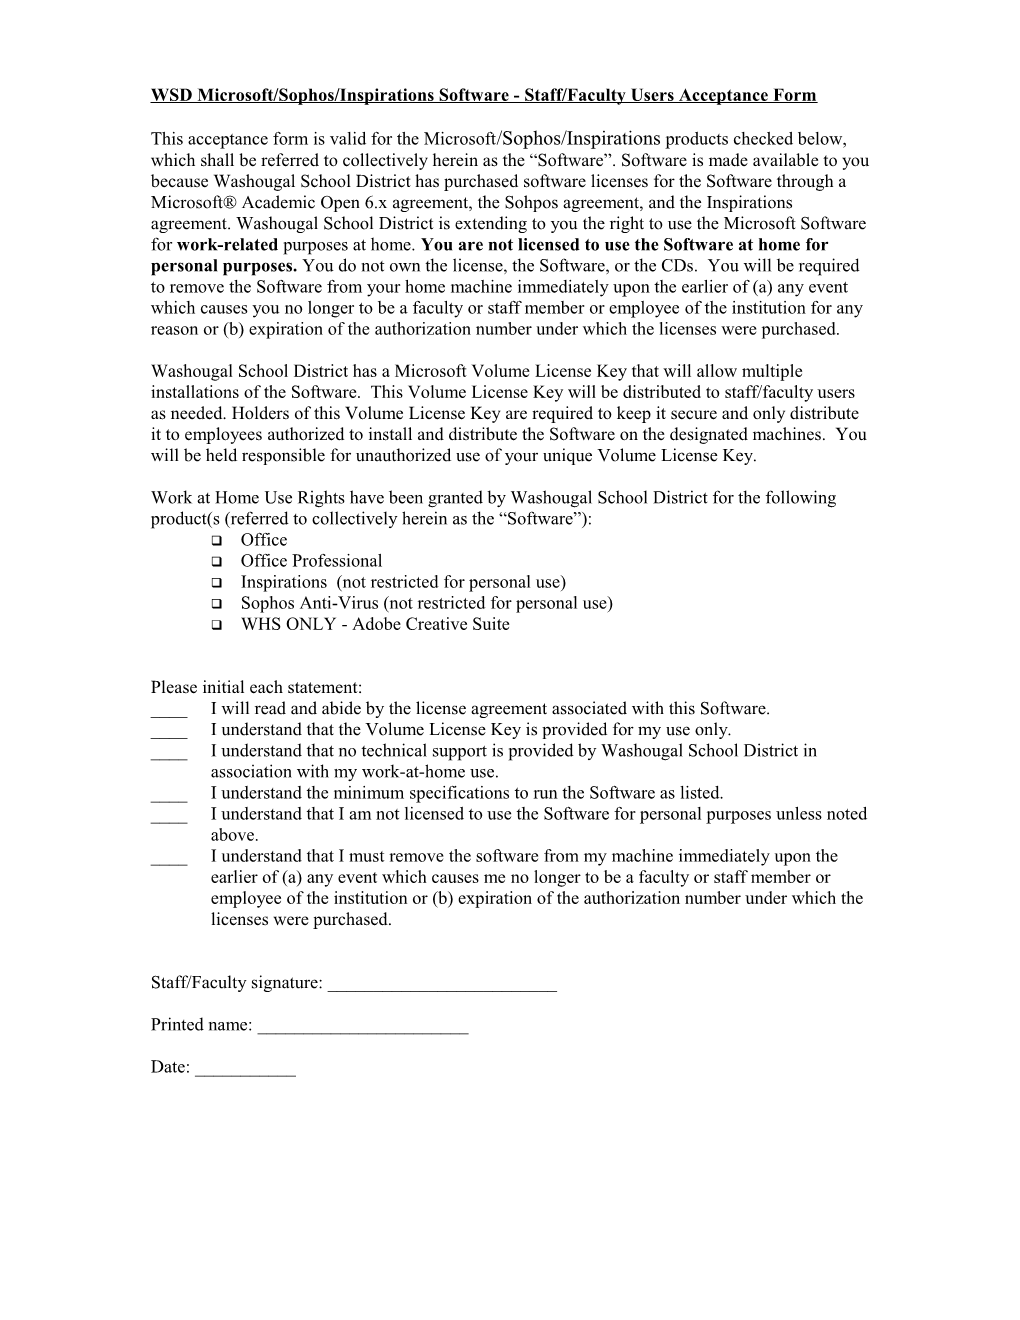 WSD Microsoft Software - Staff/Faculty Users Acceptance Form